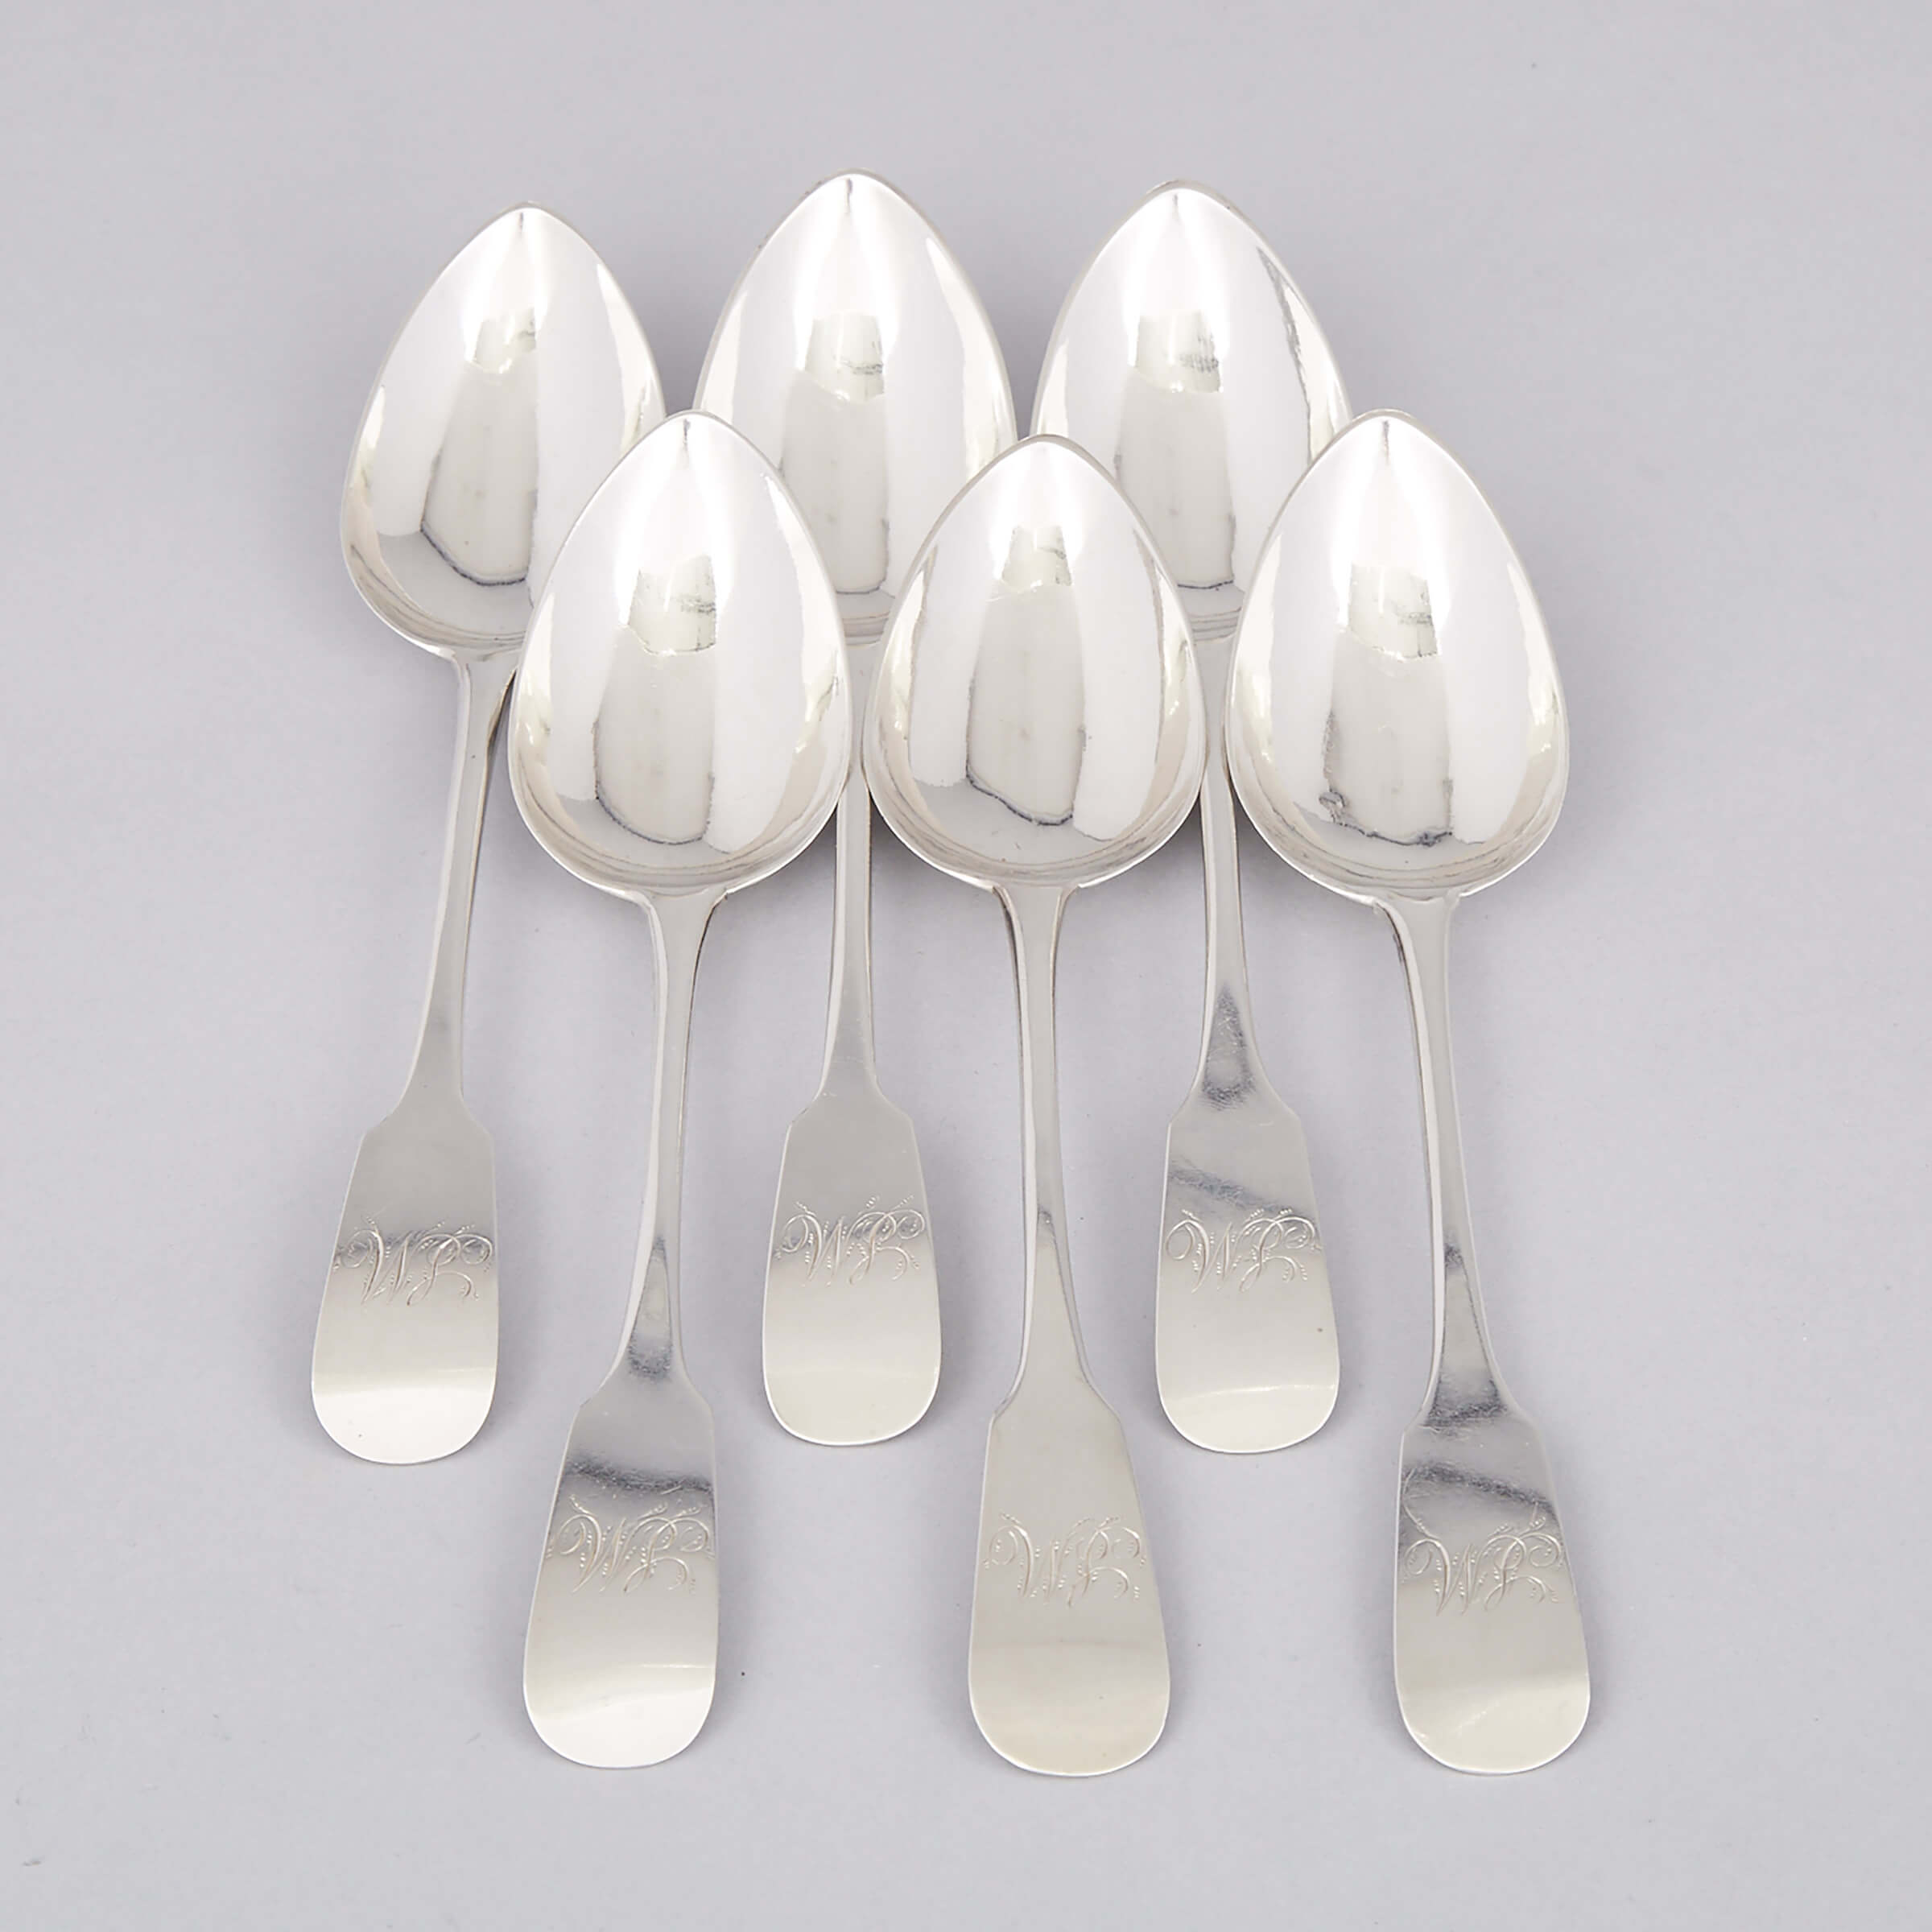 Six Scottish Provincial Silver Fiddle Pattern Table Spoons, William Ritchie, Perth, c.1810